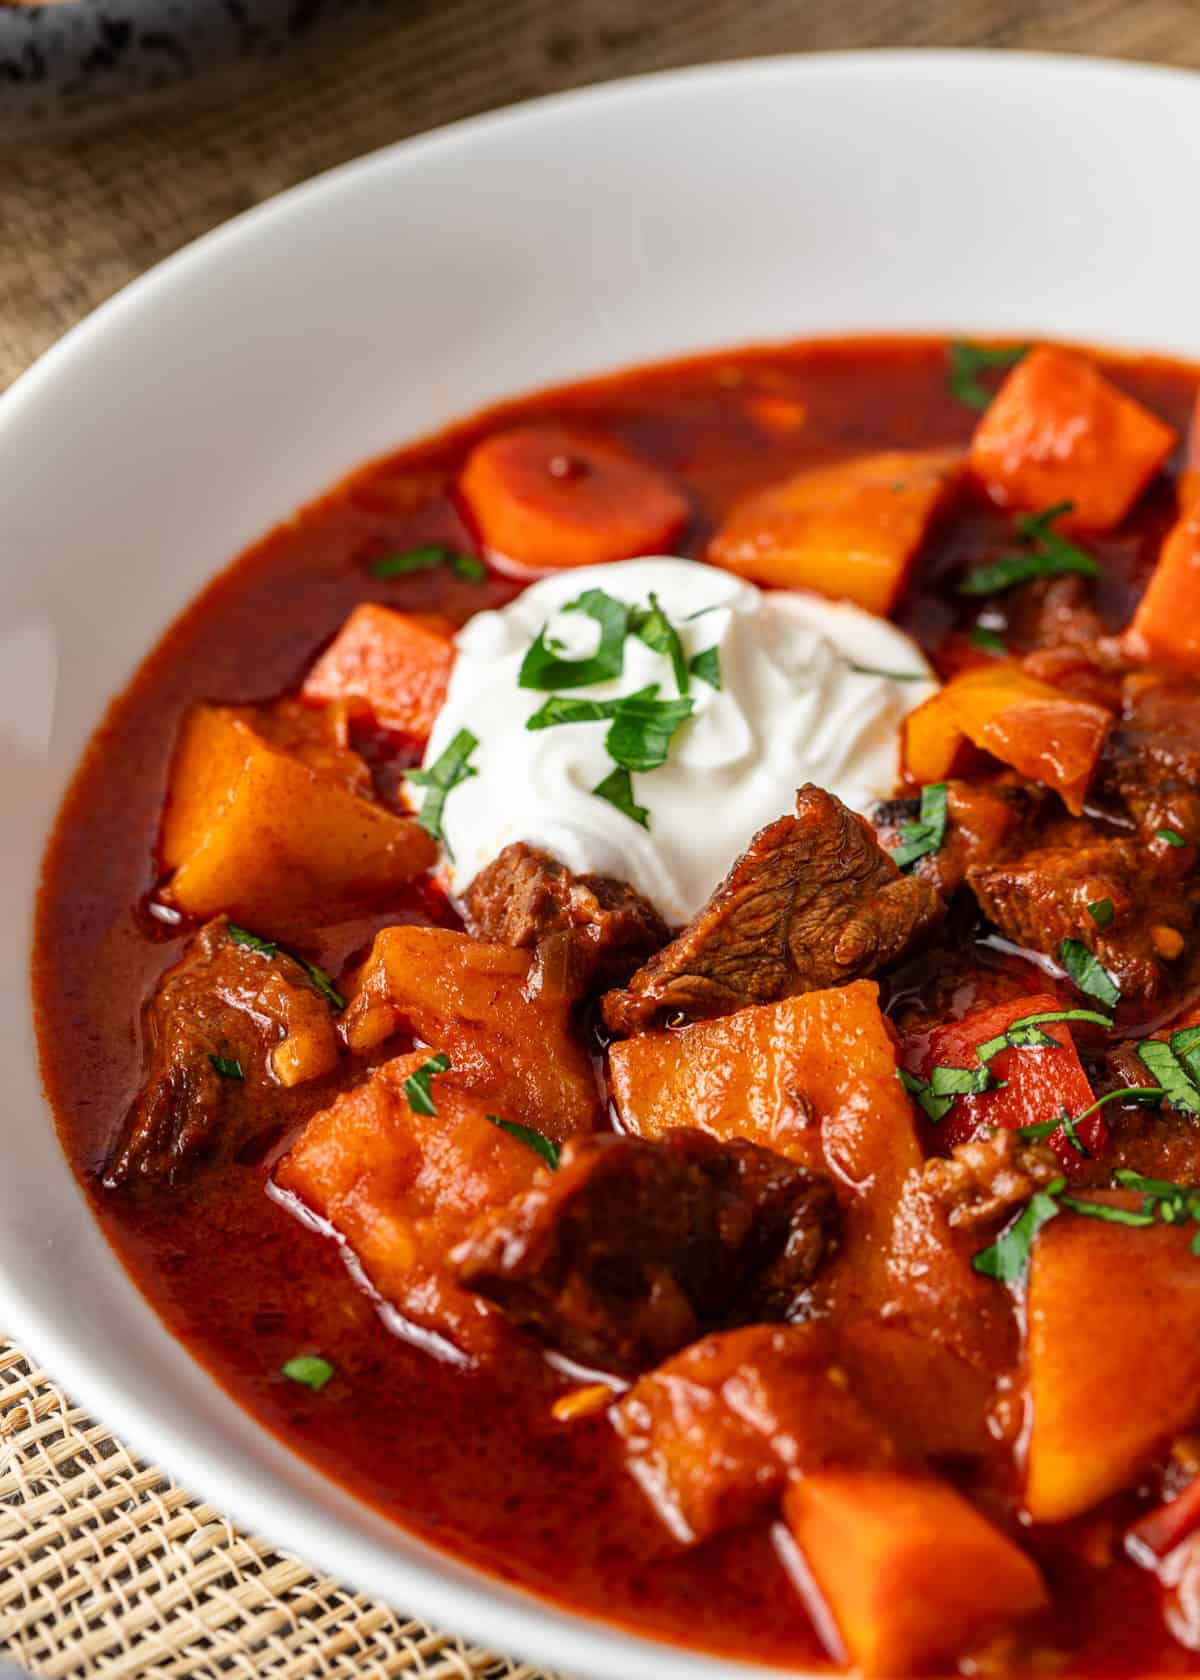 extreme closeup: hungarian goulash in a bowl with sour creamw, beef, and vegetables showing